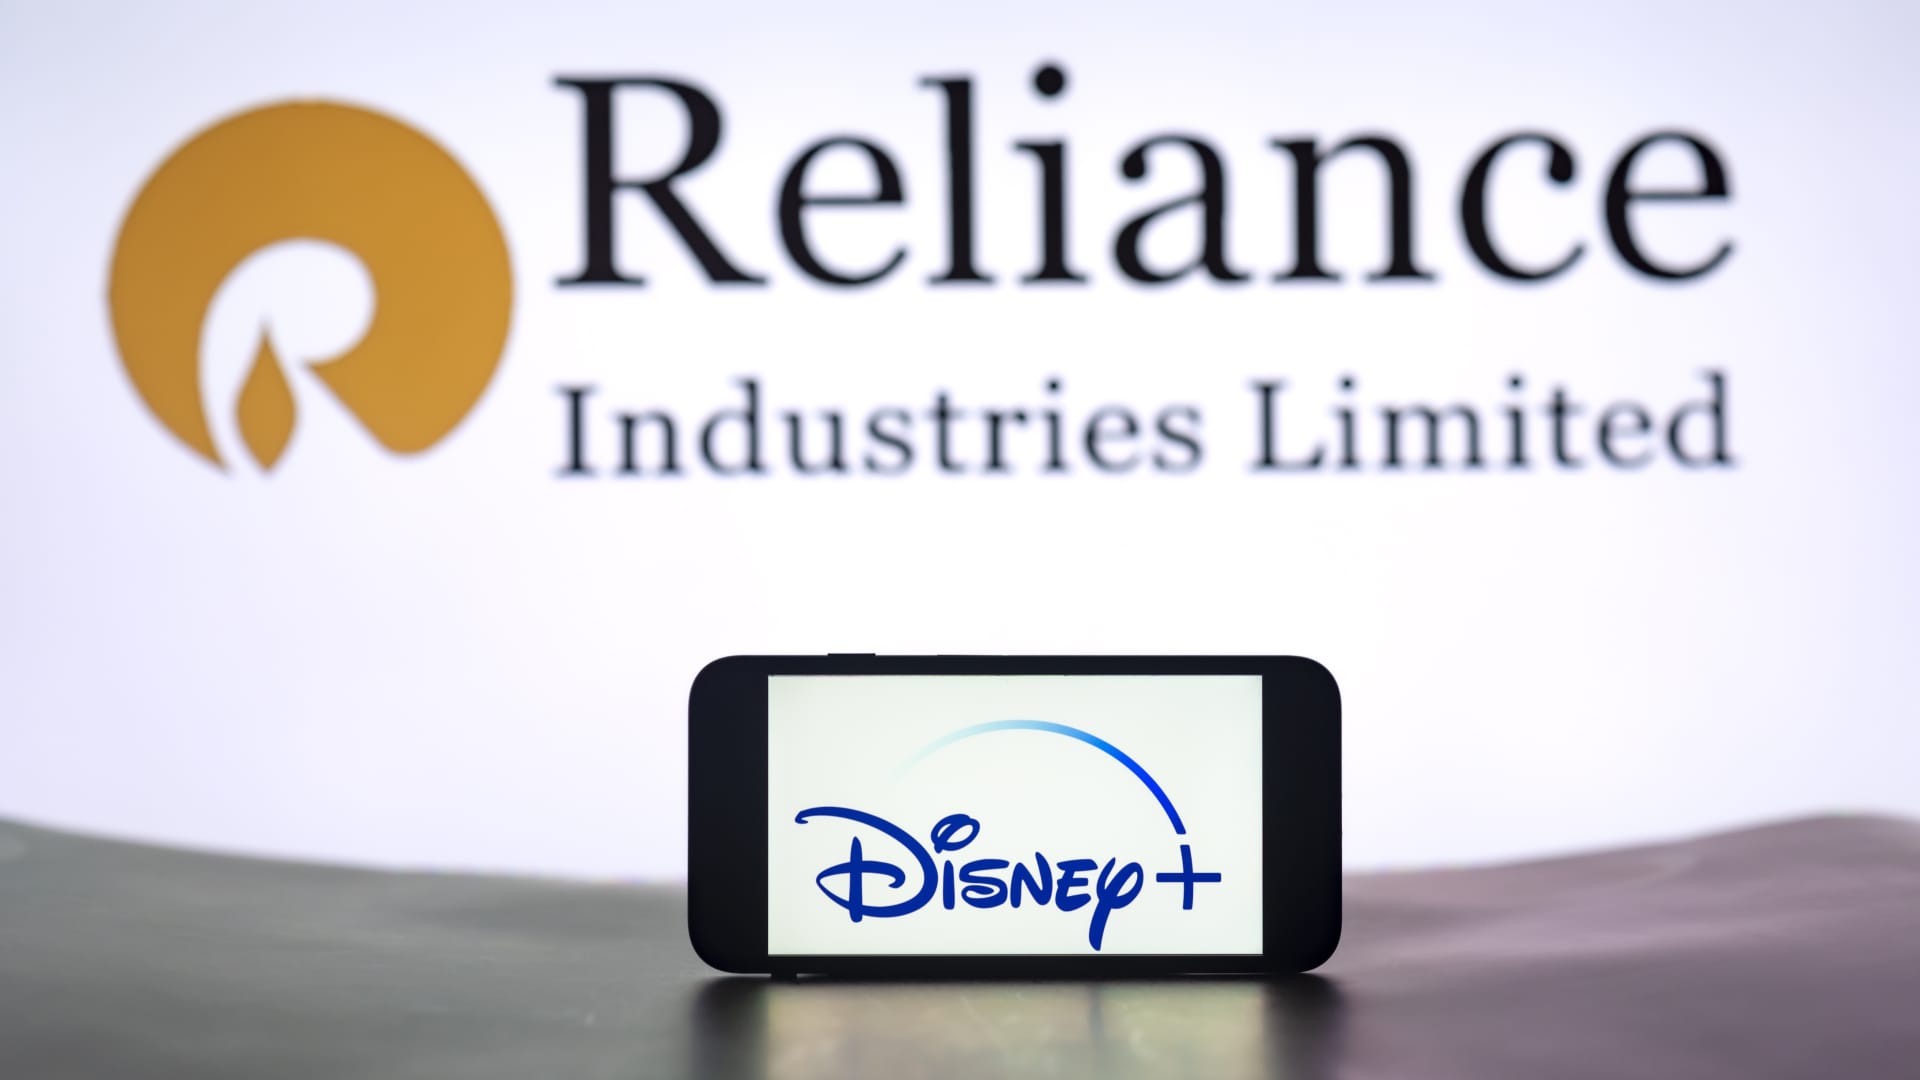 Disney and Reliance to merge media businesses in India in $8.5 billion joint venture